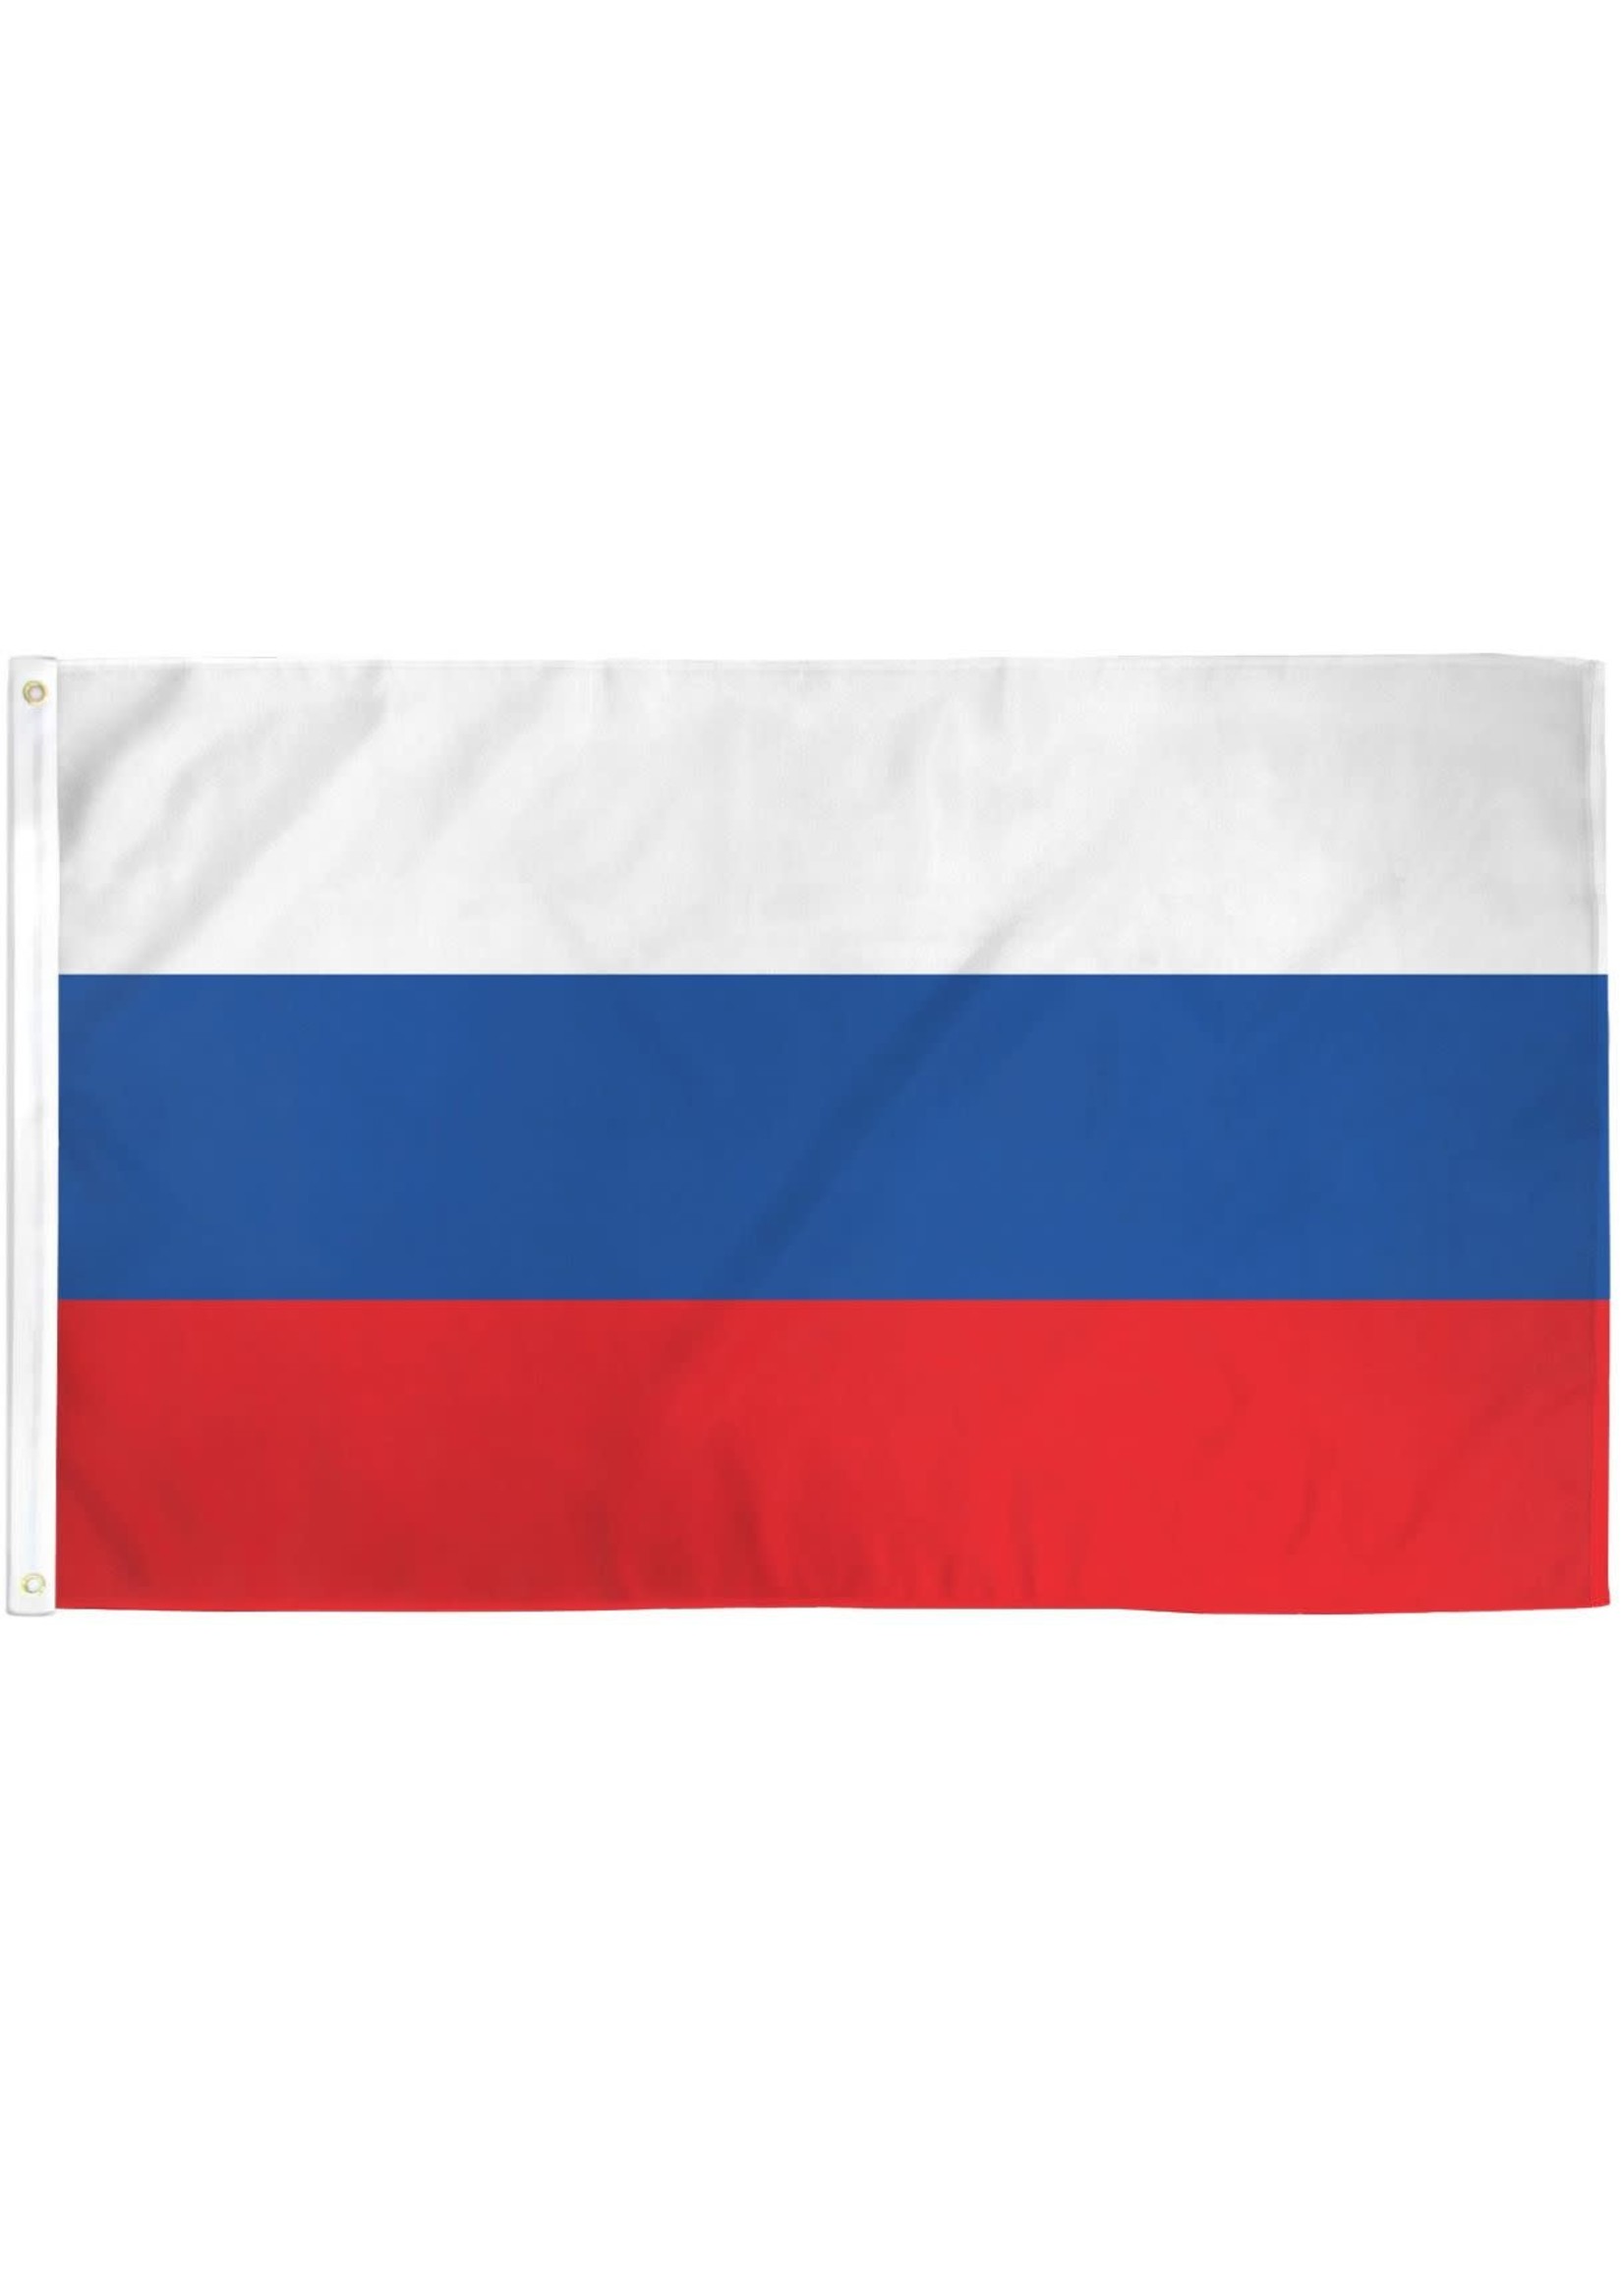 Flag of Russia, 3x5'